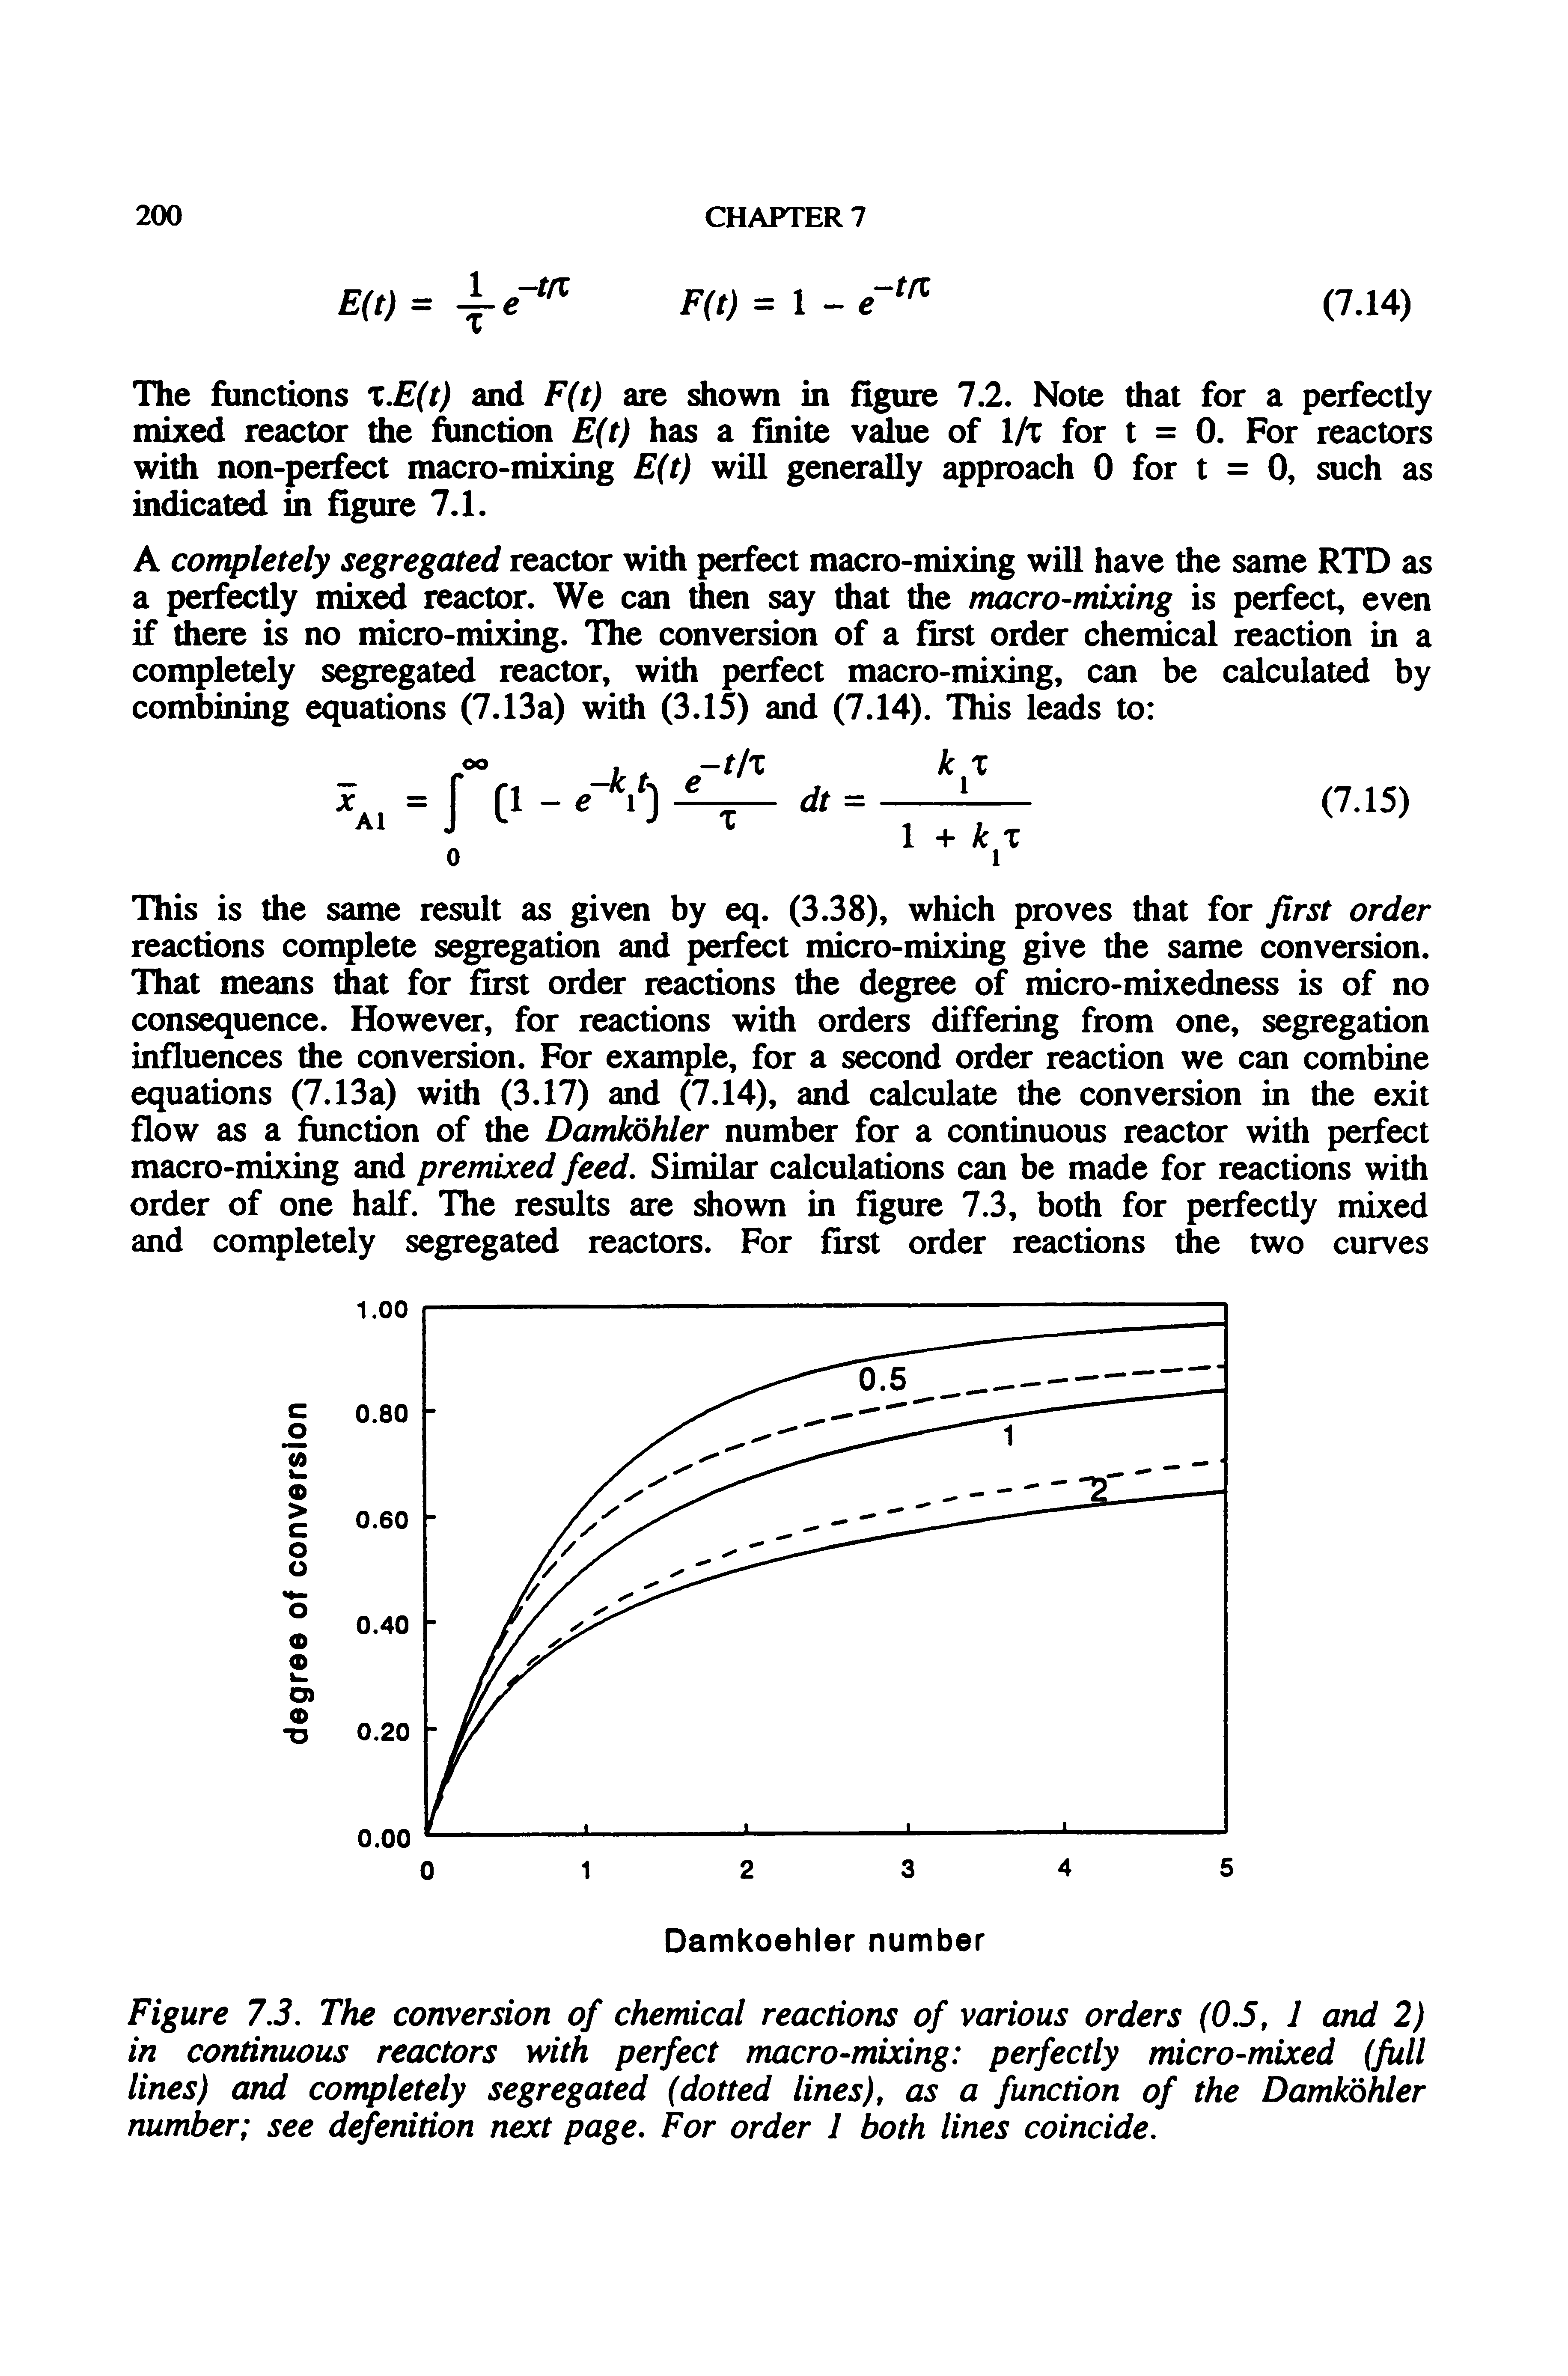 Figure 7.3. The conversion of chemical reactions of various orders (0.5, 1 and 2) in continuous reactors with perfect macro-mixing perfectly micro-mixed (full lines) and completely segregated (dotted lines), as a function of the Damkbhler number see defenition next page. For order 1 both lines coincide.